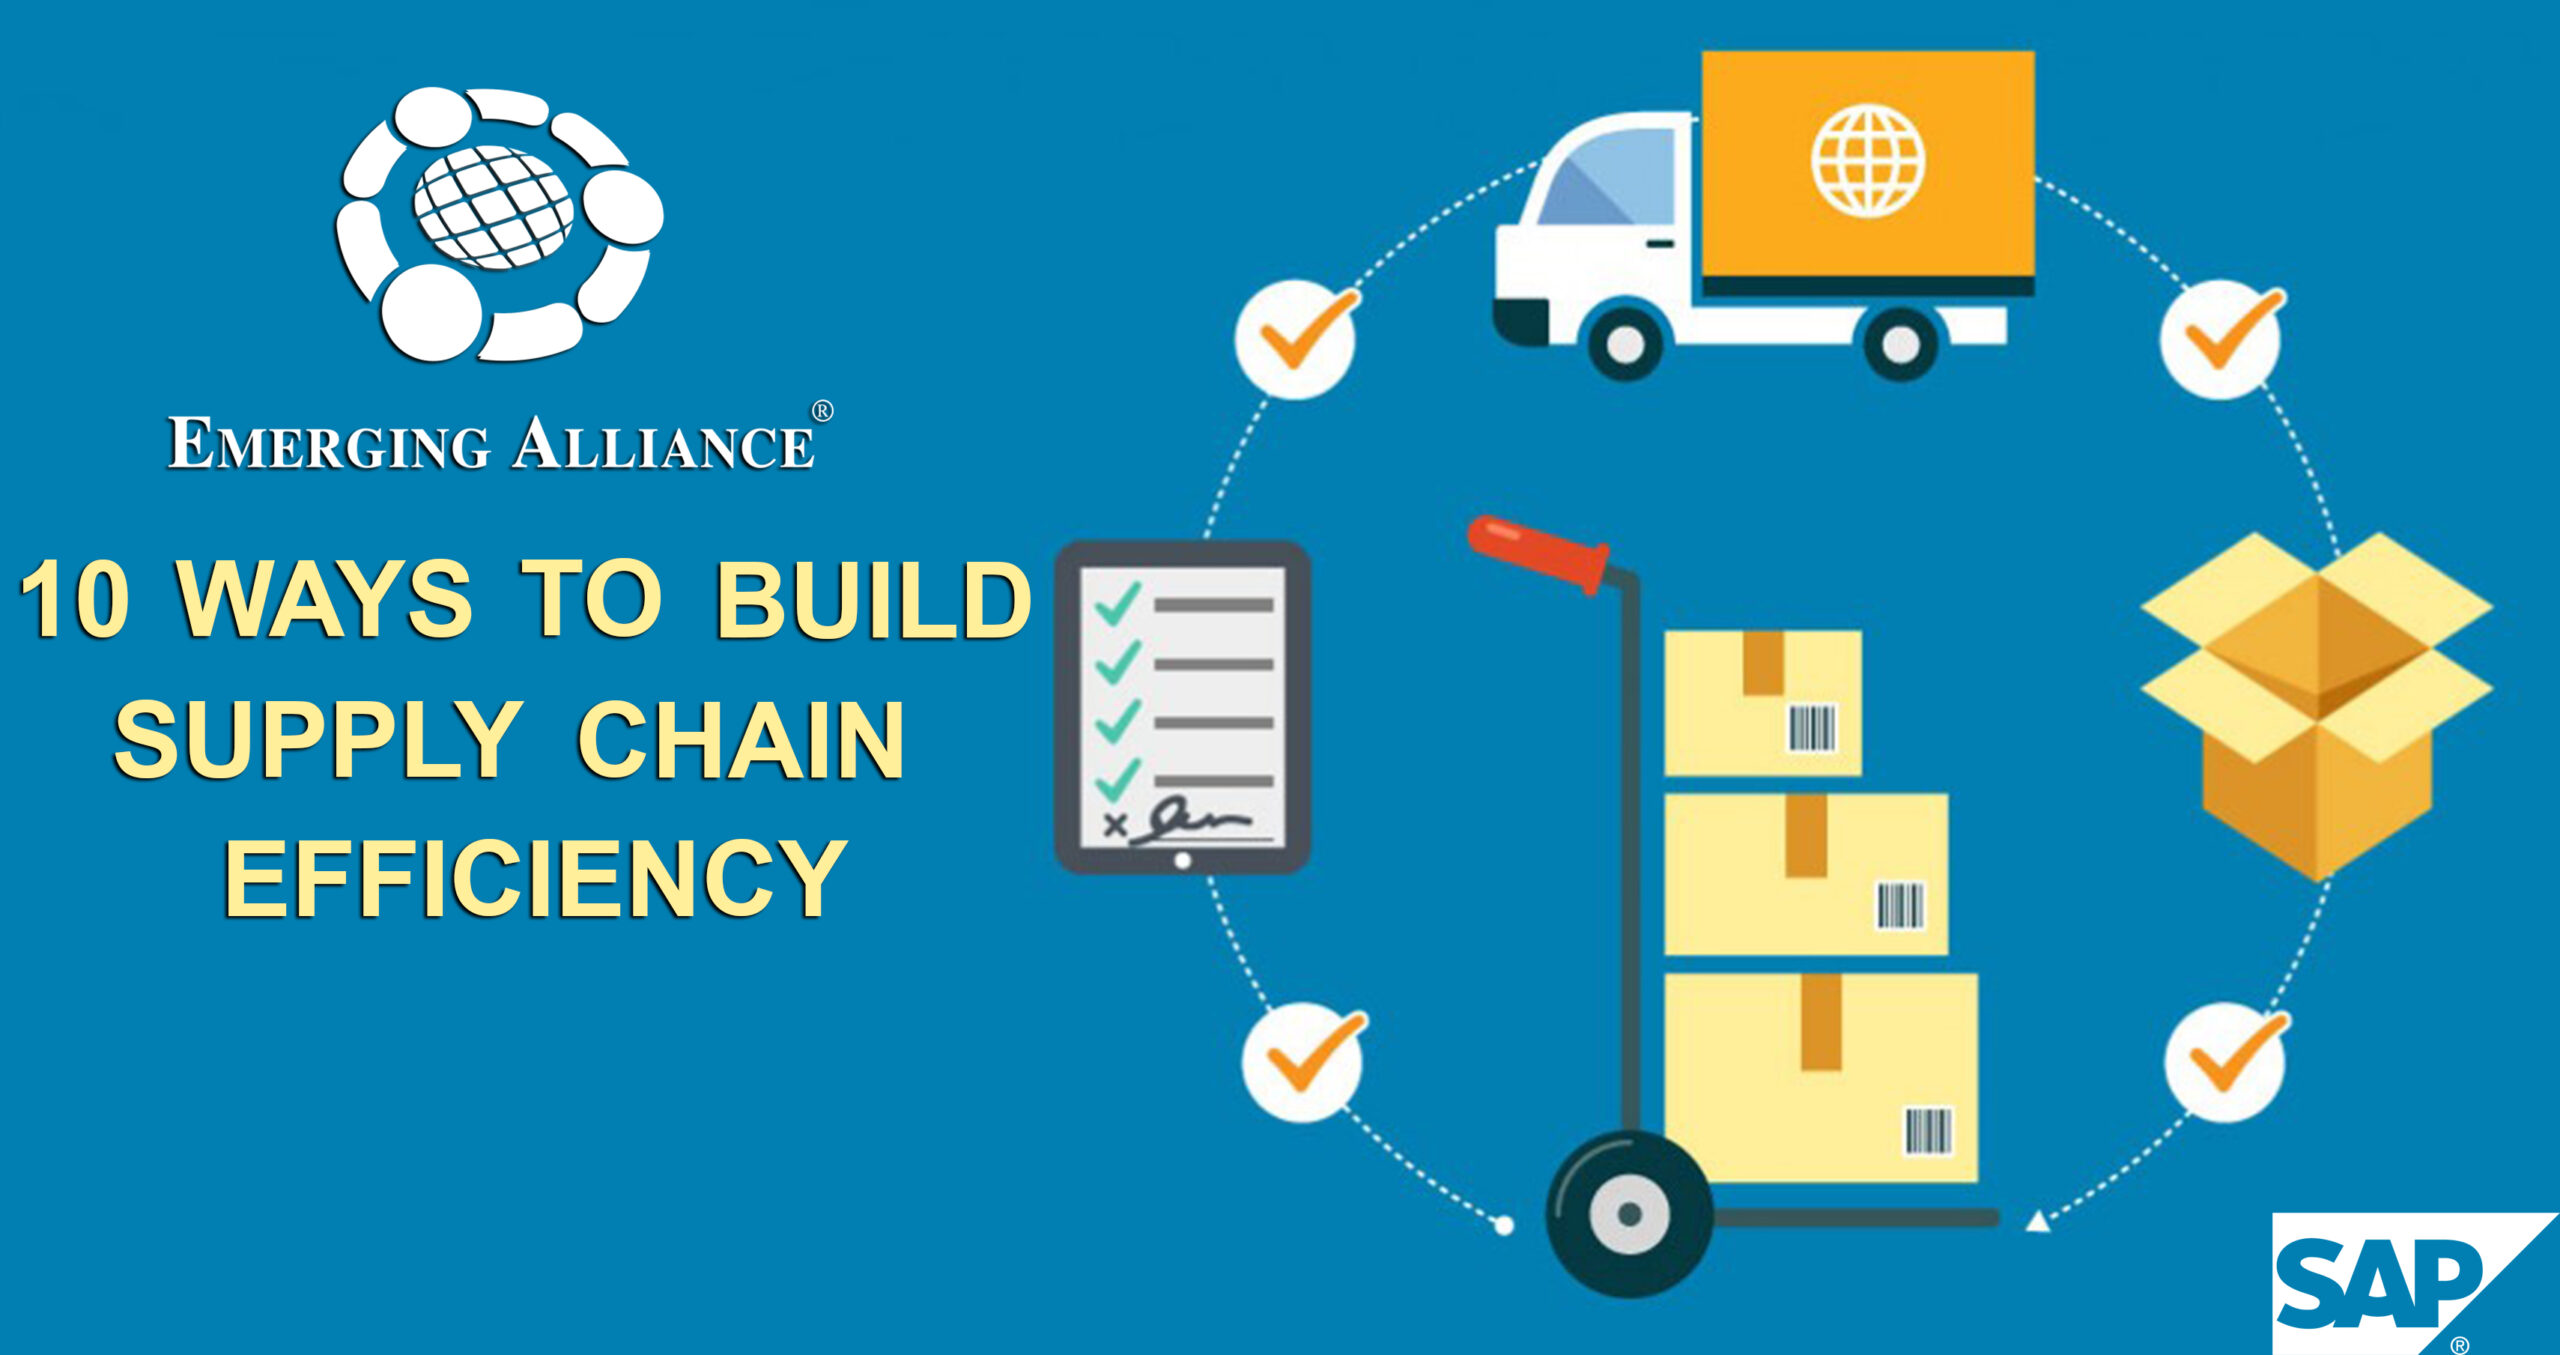 supply chain efficiency with SAP B1